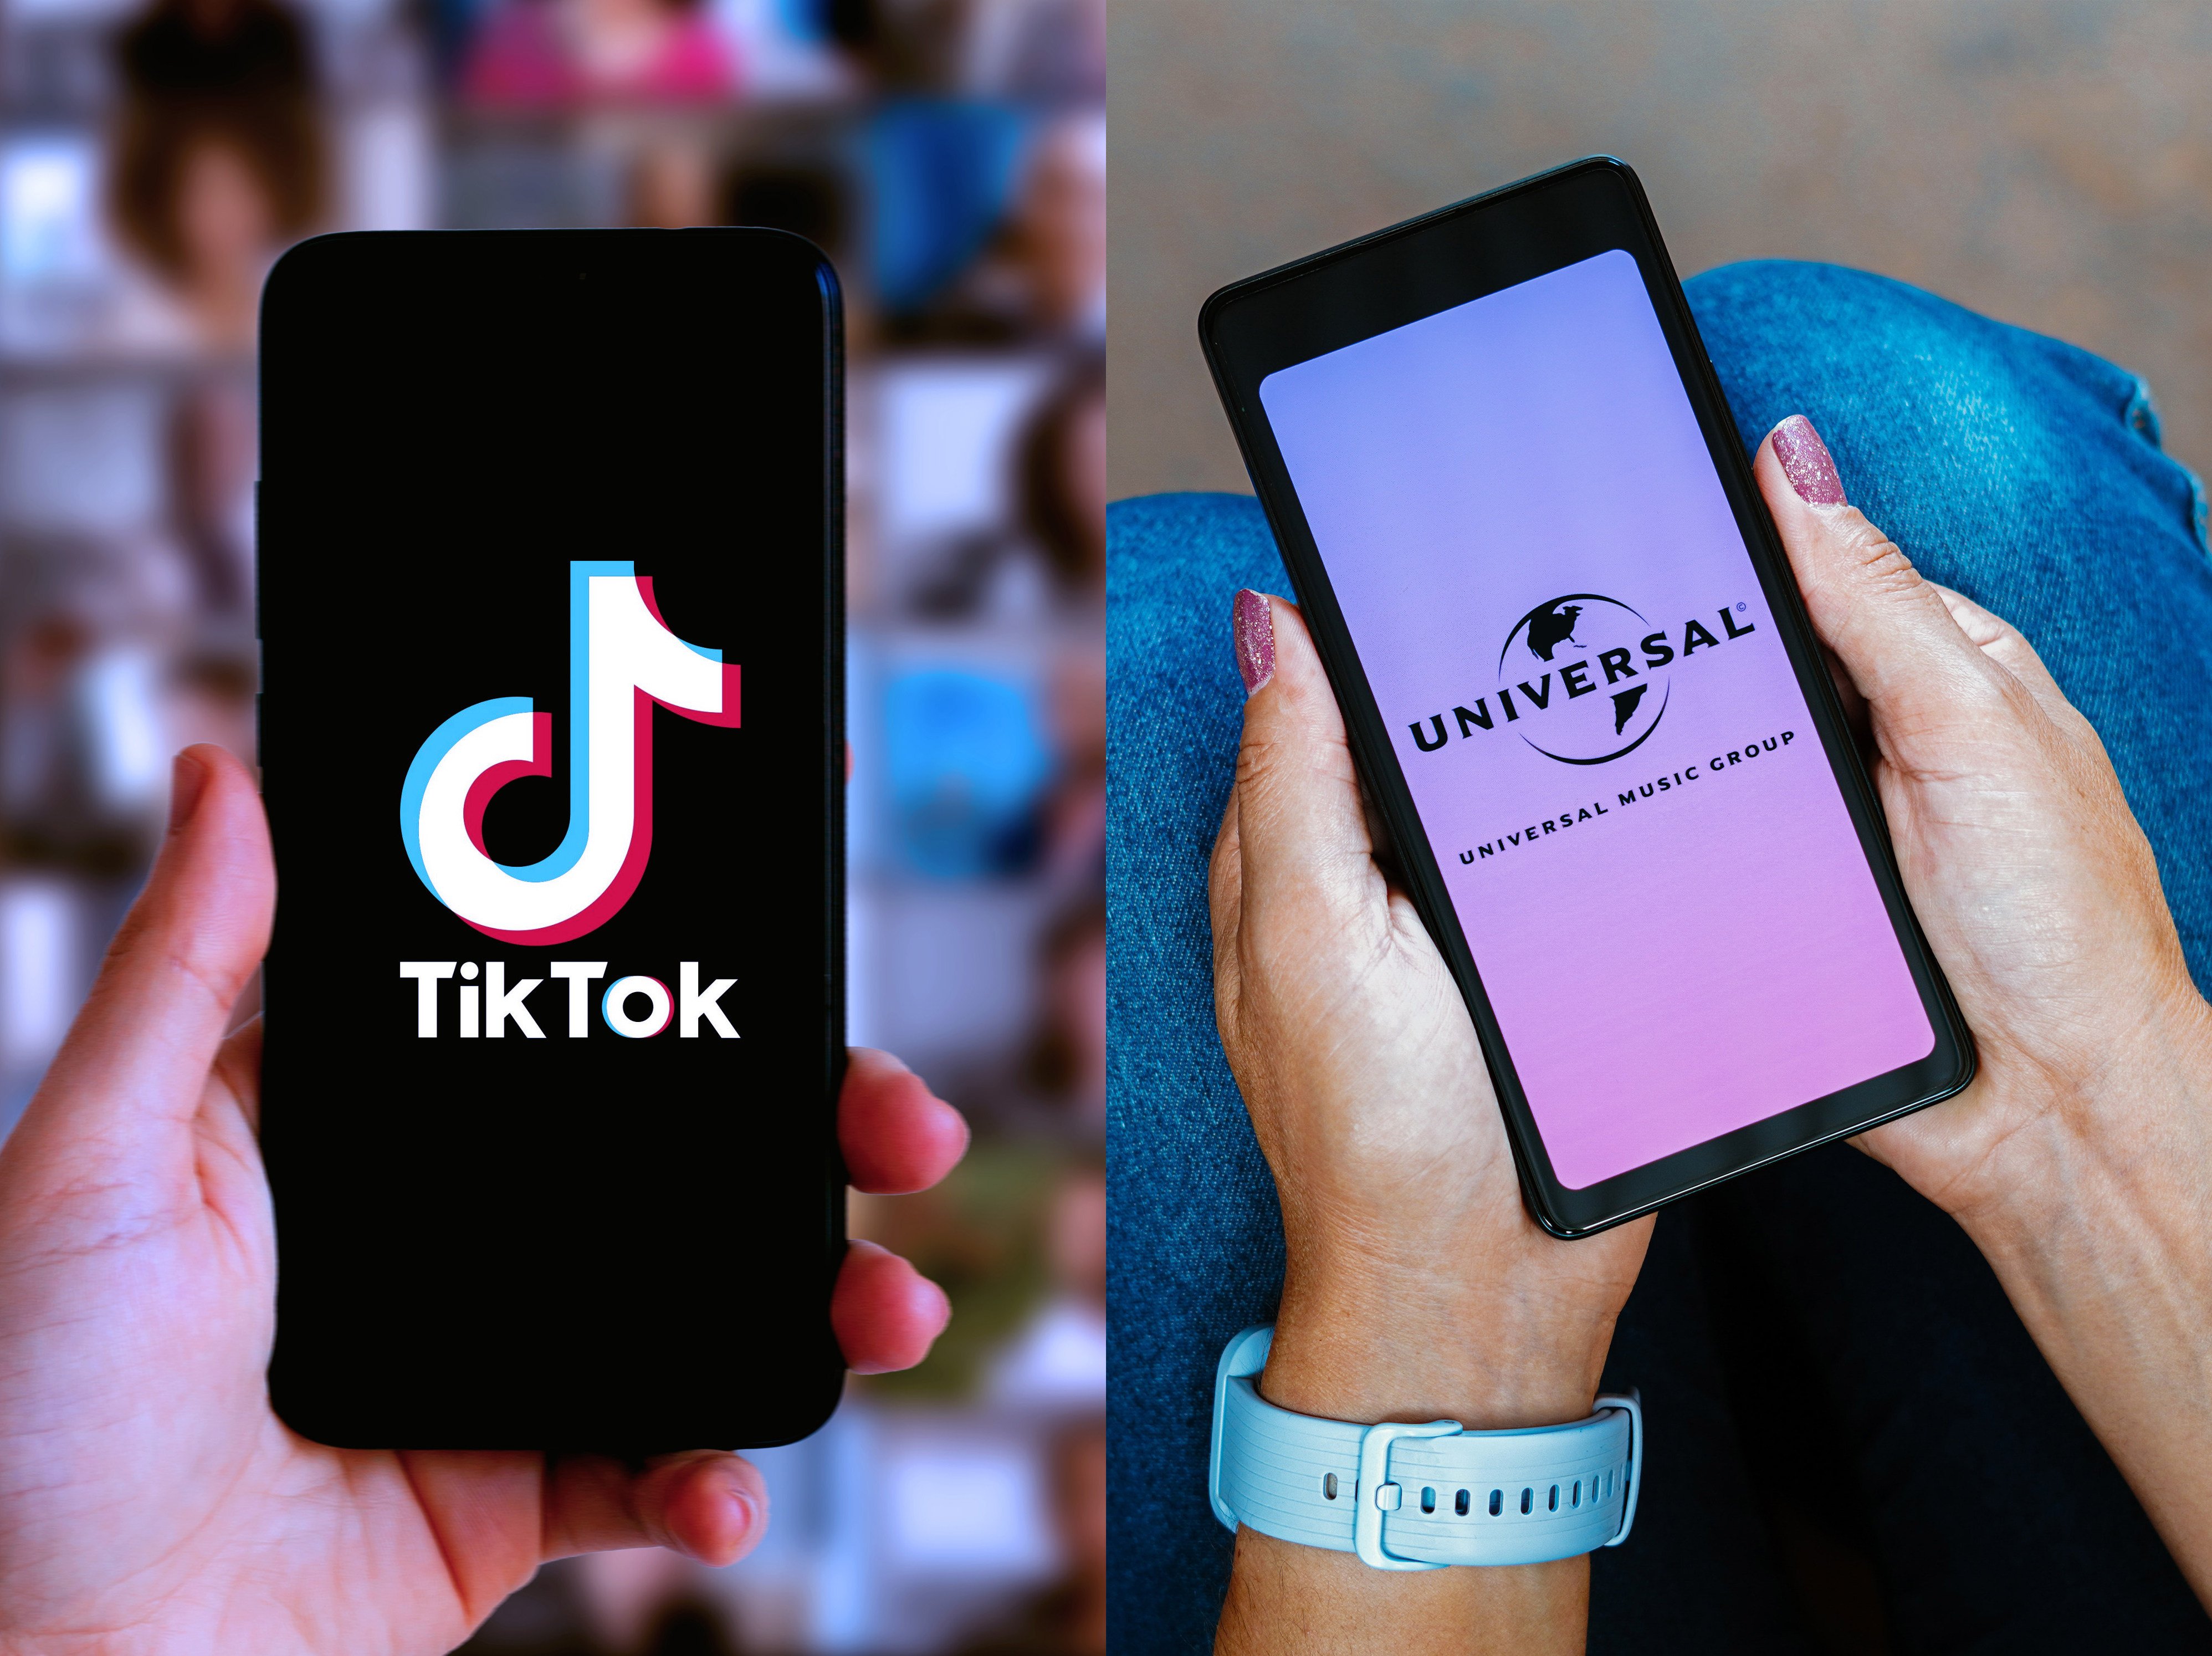 ByteDance-owned TikTok and Universal Music Group have signed in Los Angeles what they describe as a “multidimensional licensing agreement”. Photos: Handout 